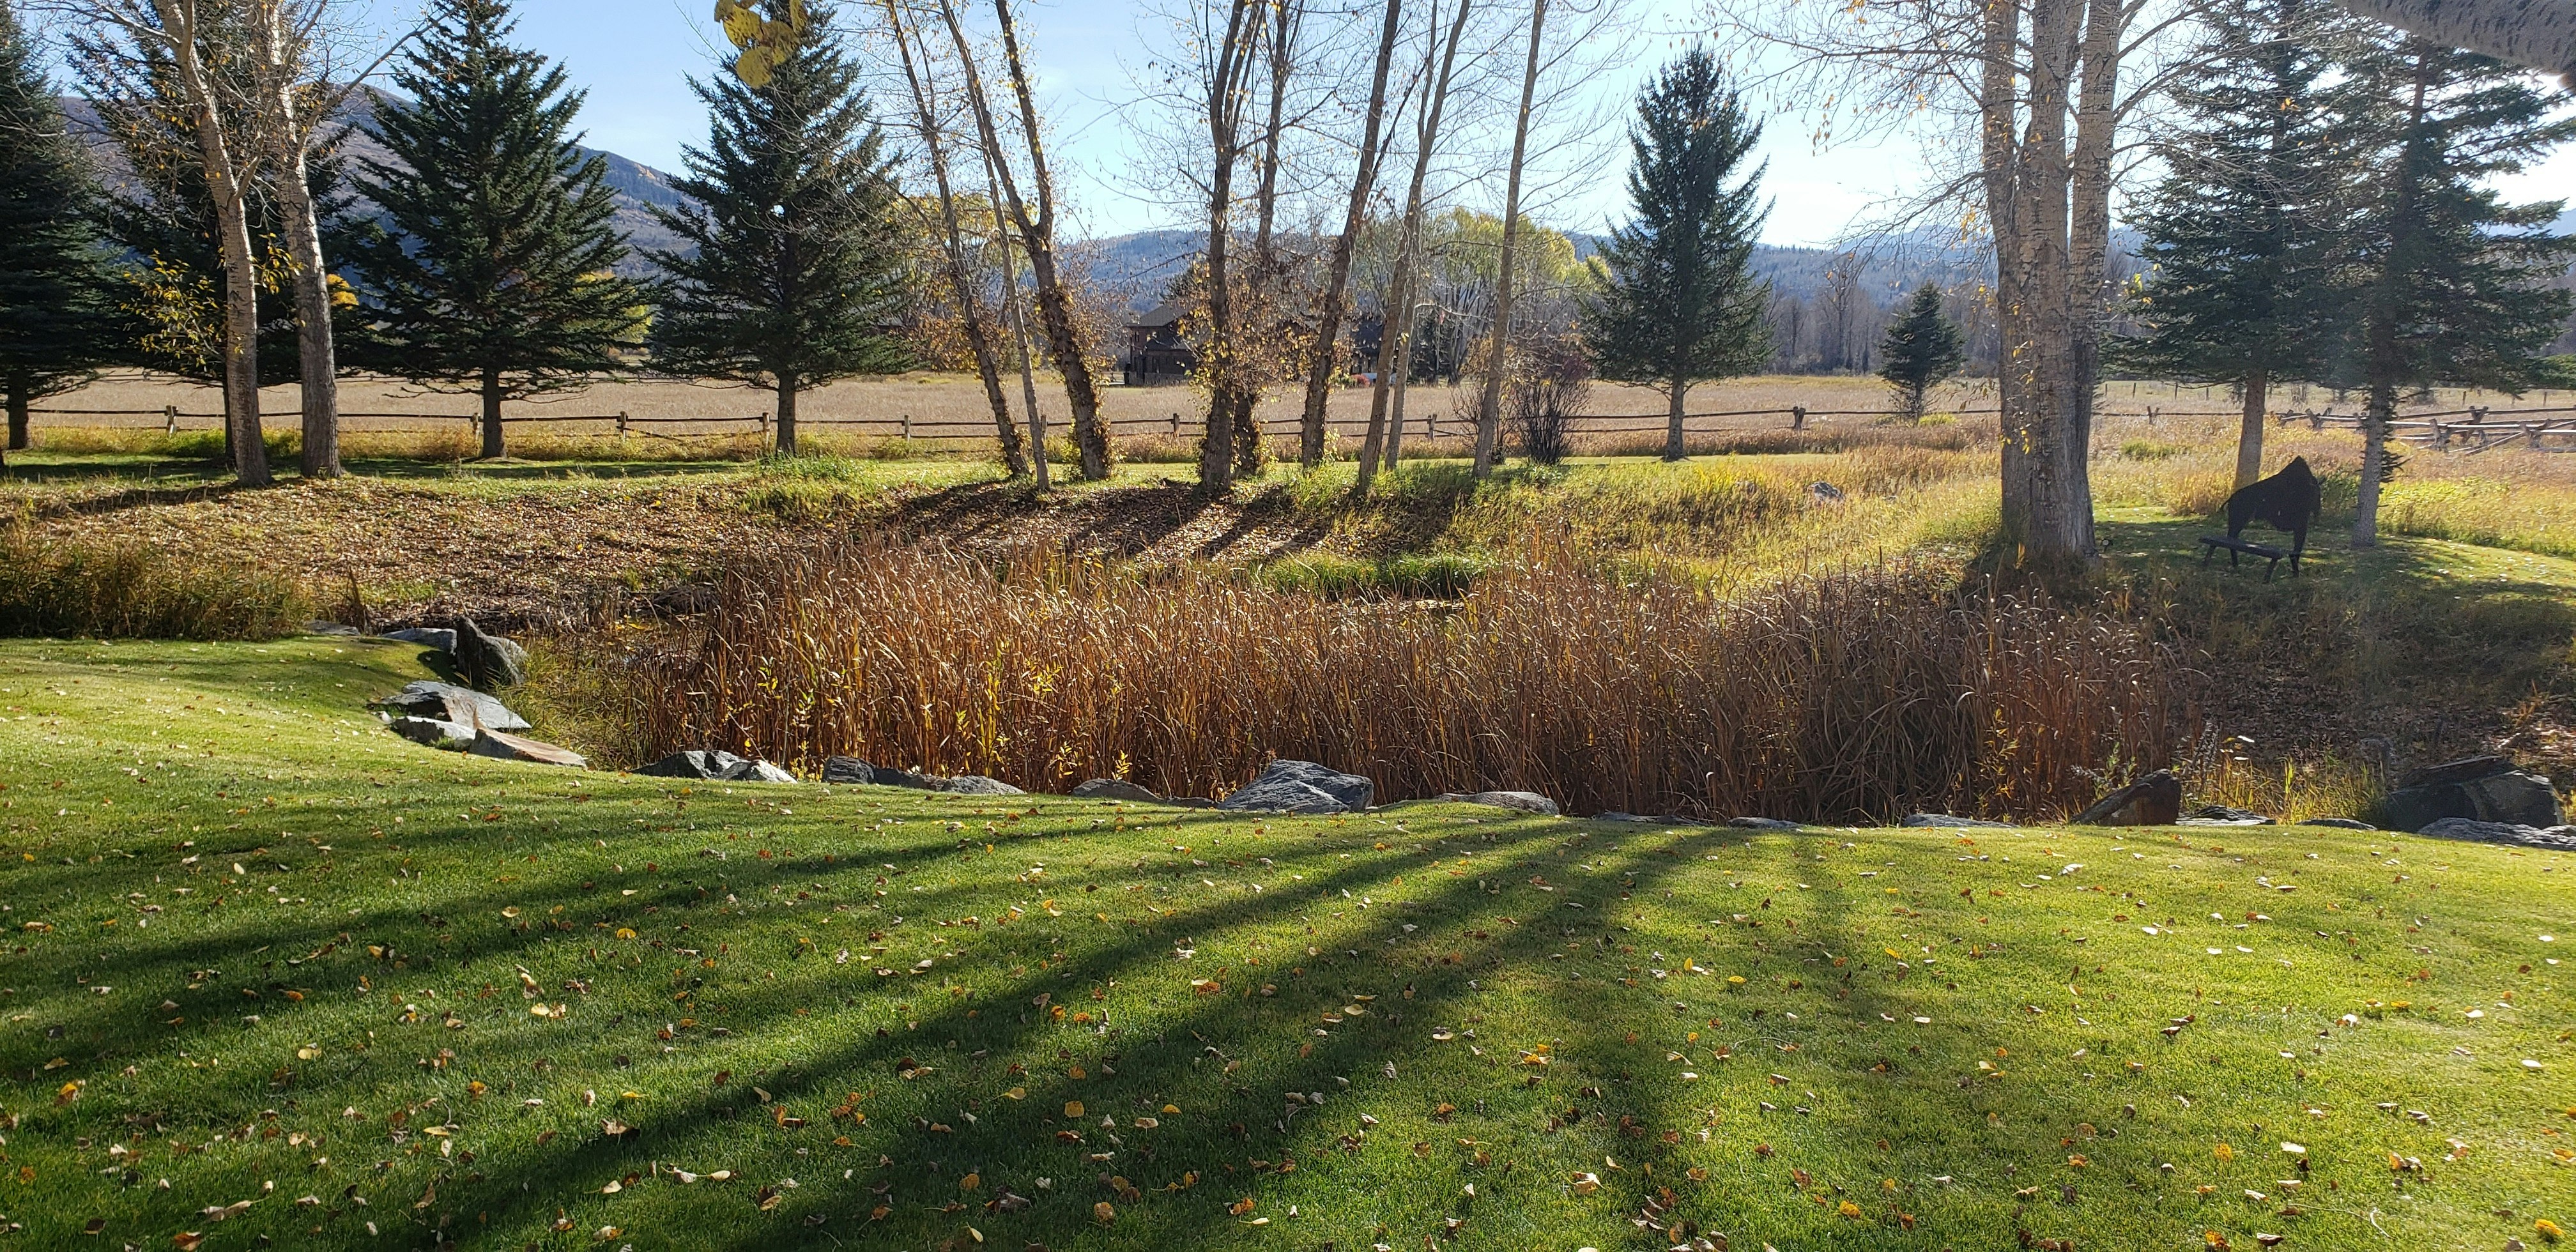 The pond has pretty flowers in summer, and golden brown cattails and grasses for fall.